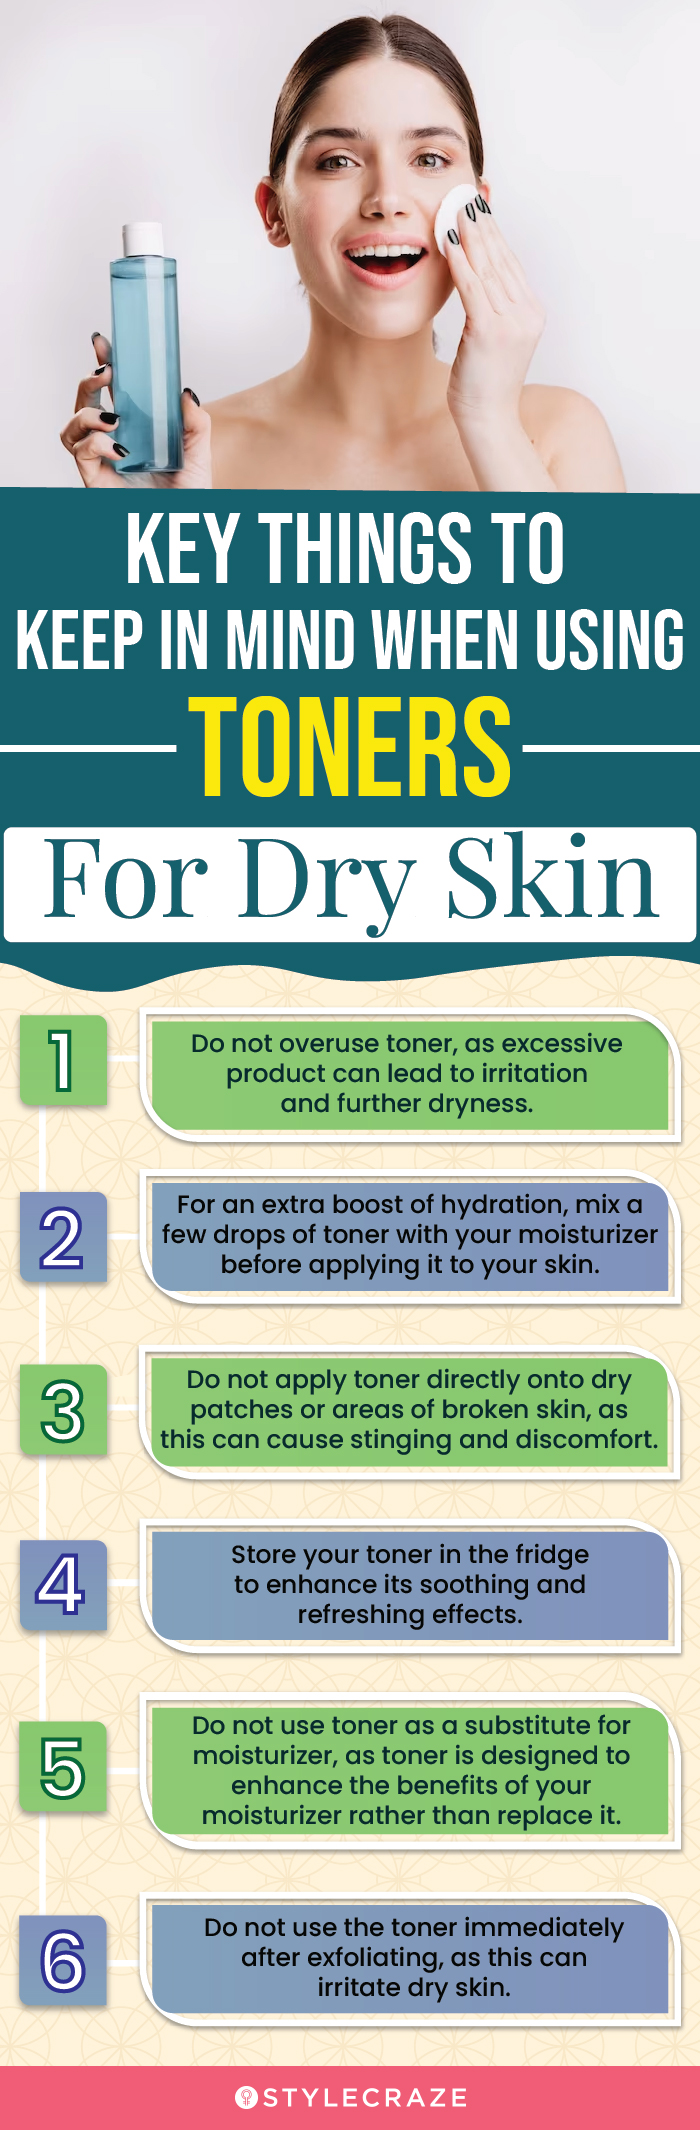 Key Things To Keep In Mind When Using Toners (infographic)